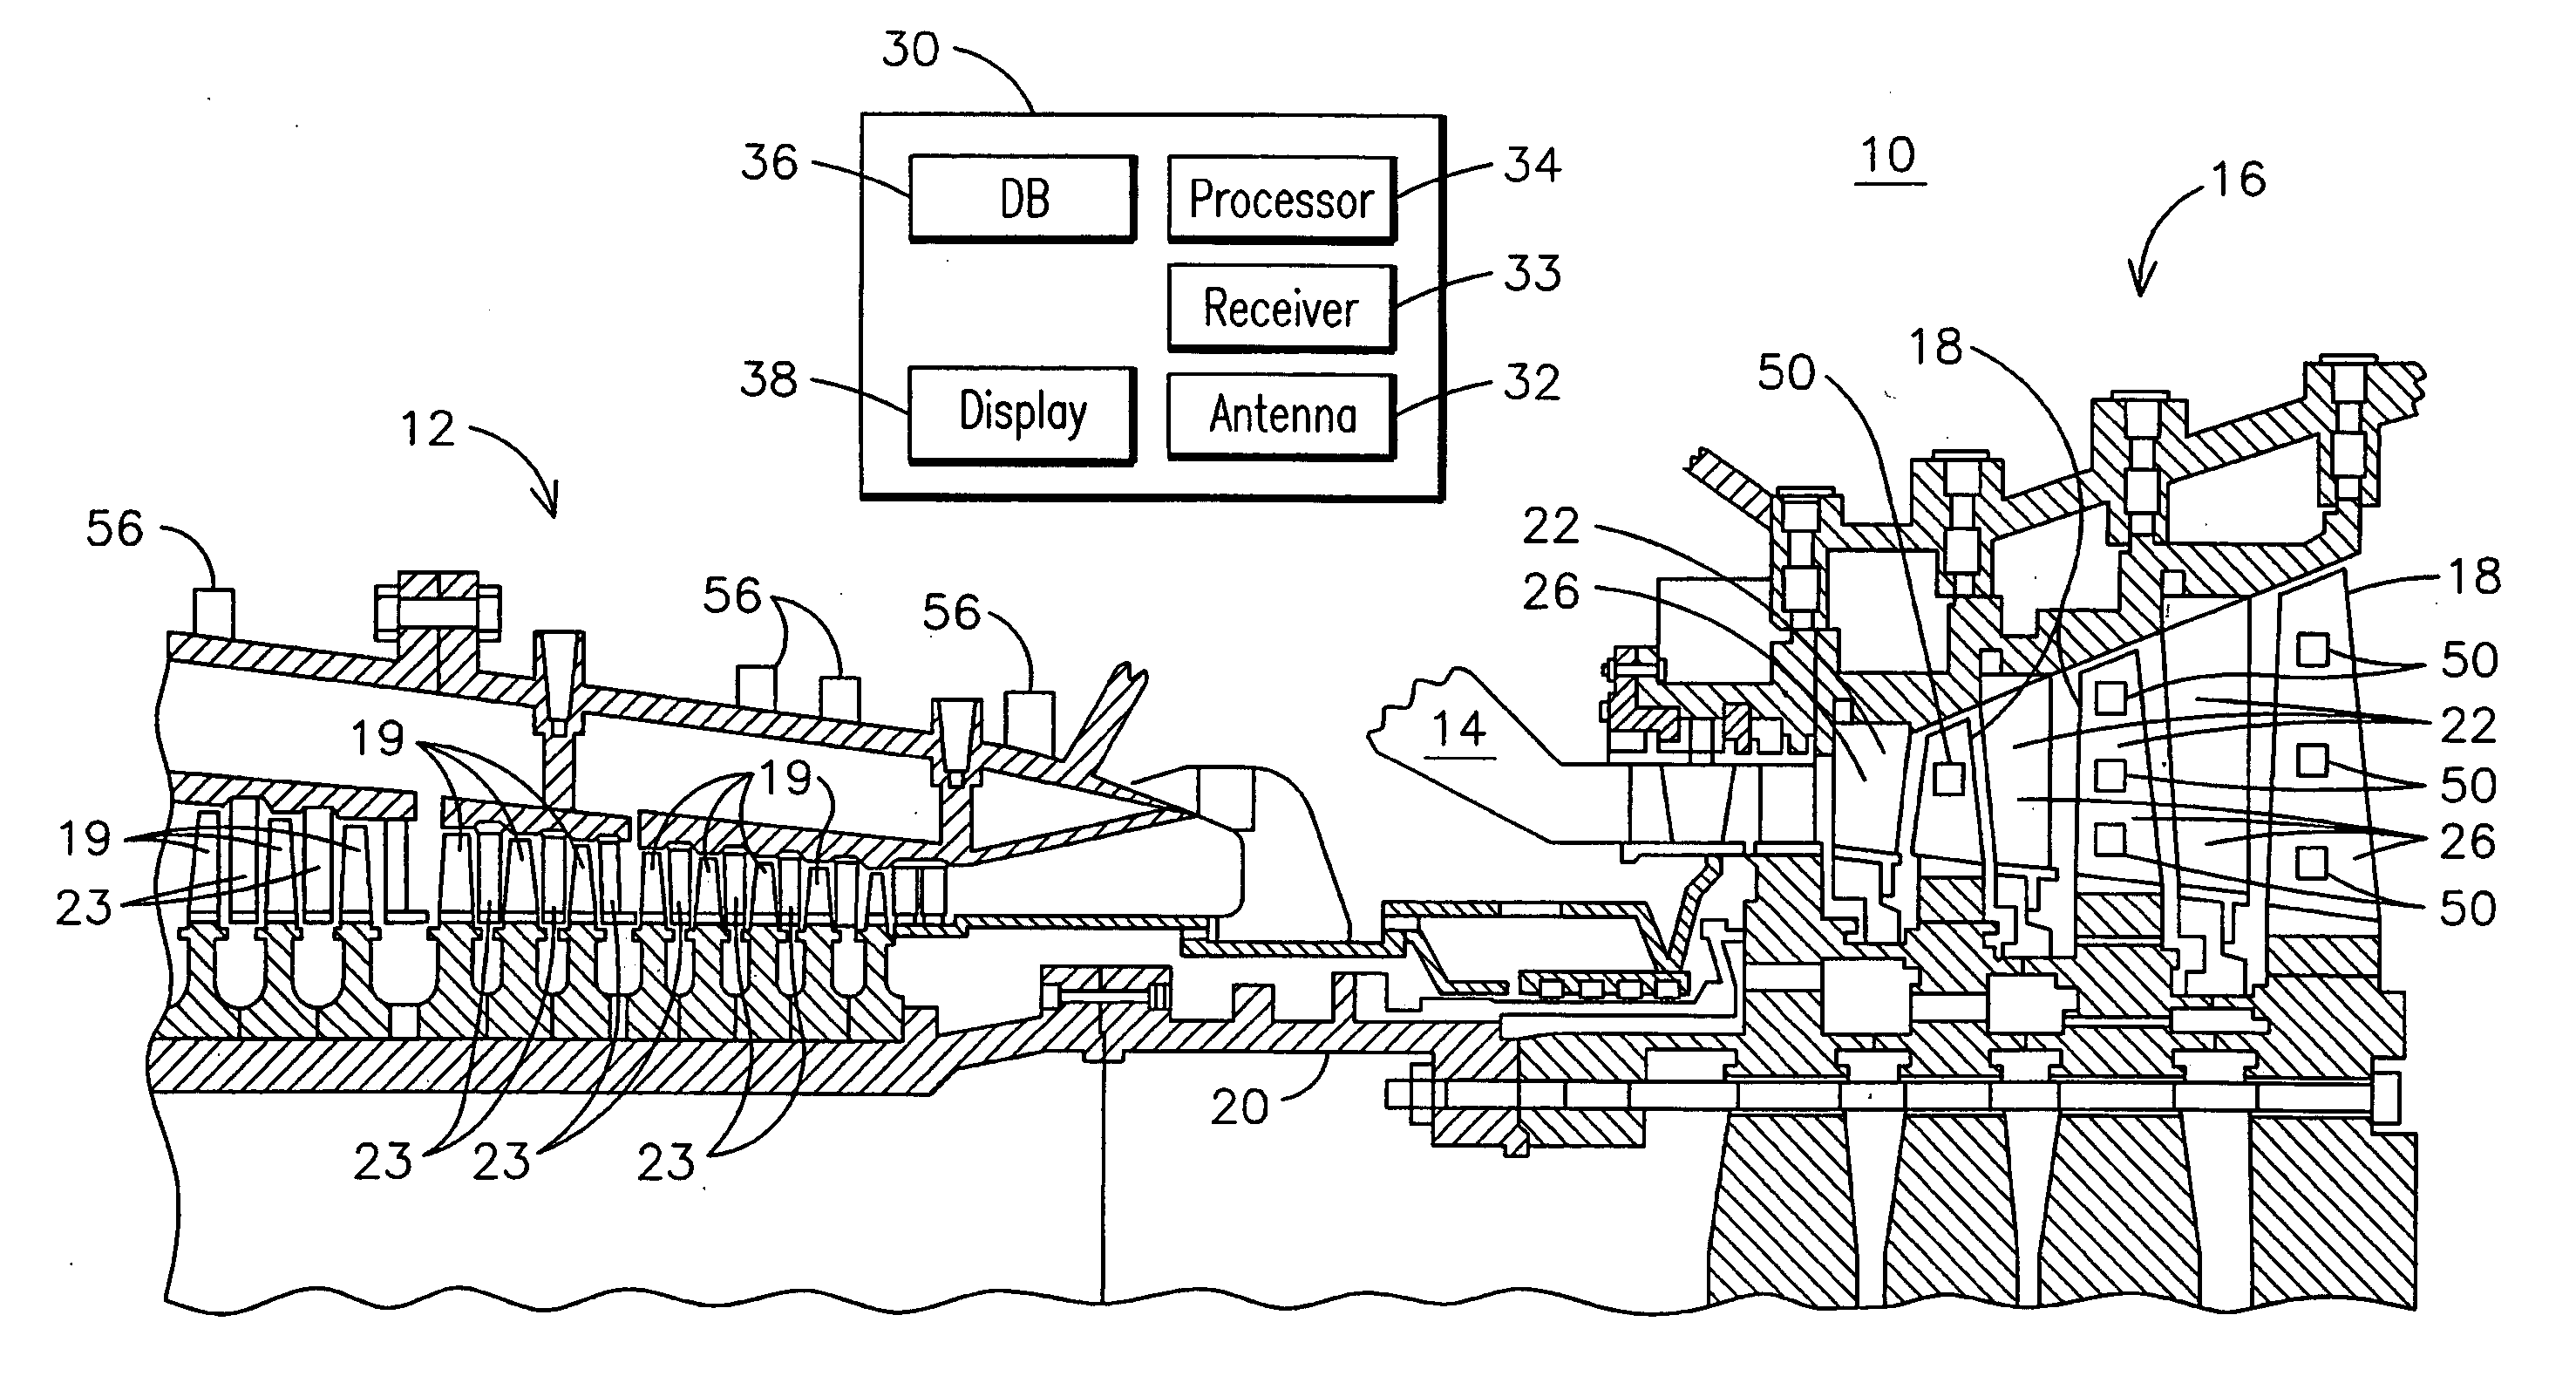 Apparatus and method of monitoring operating parameters of a gas turbine